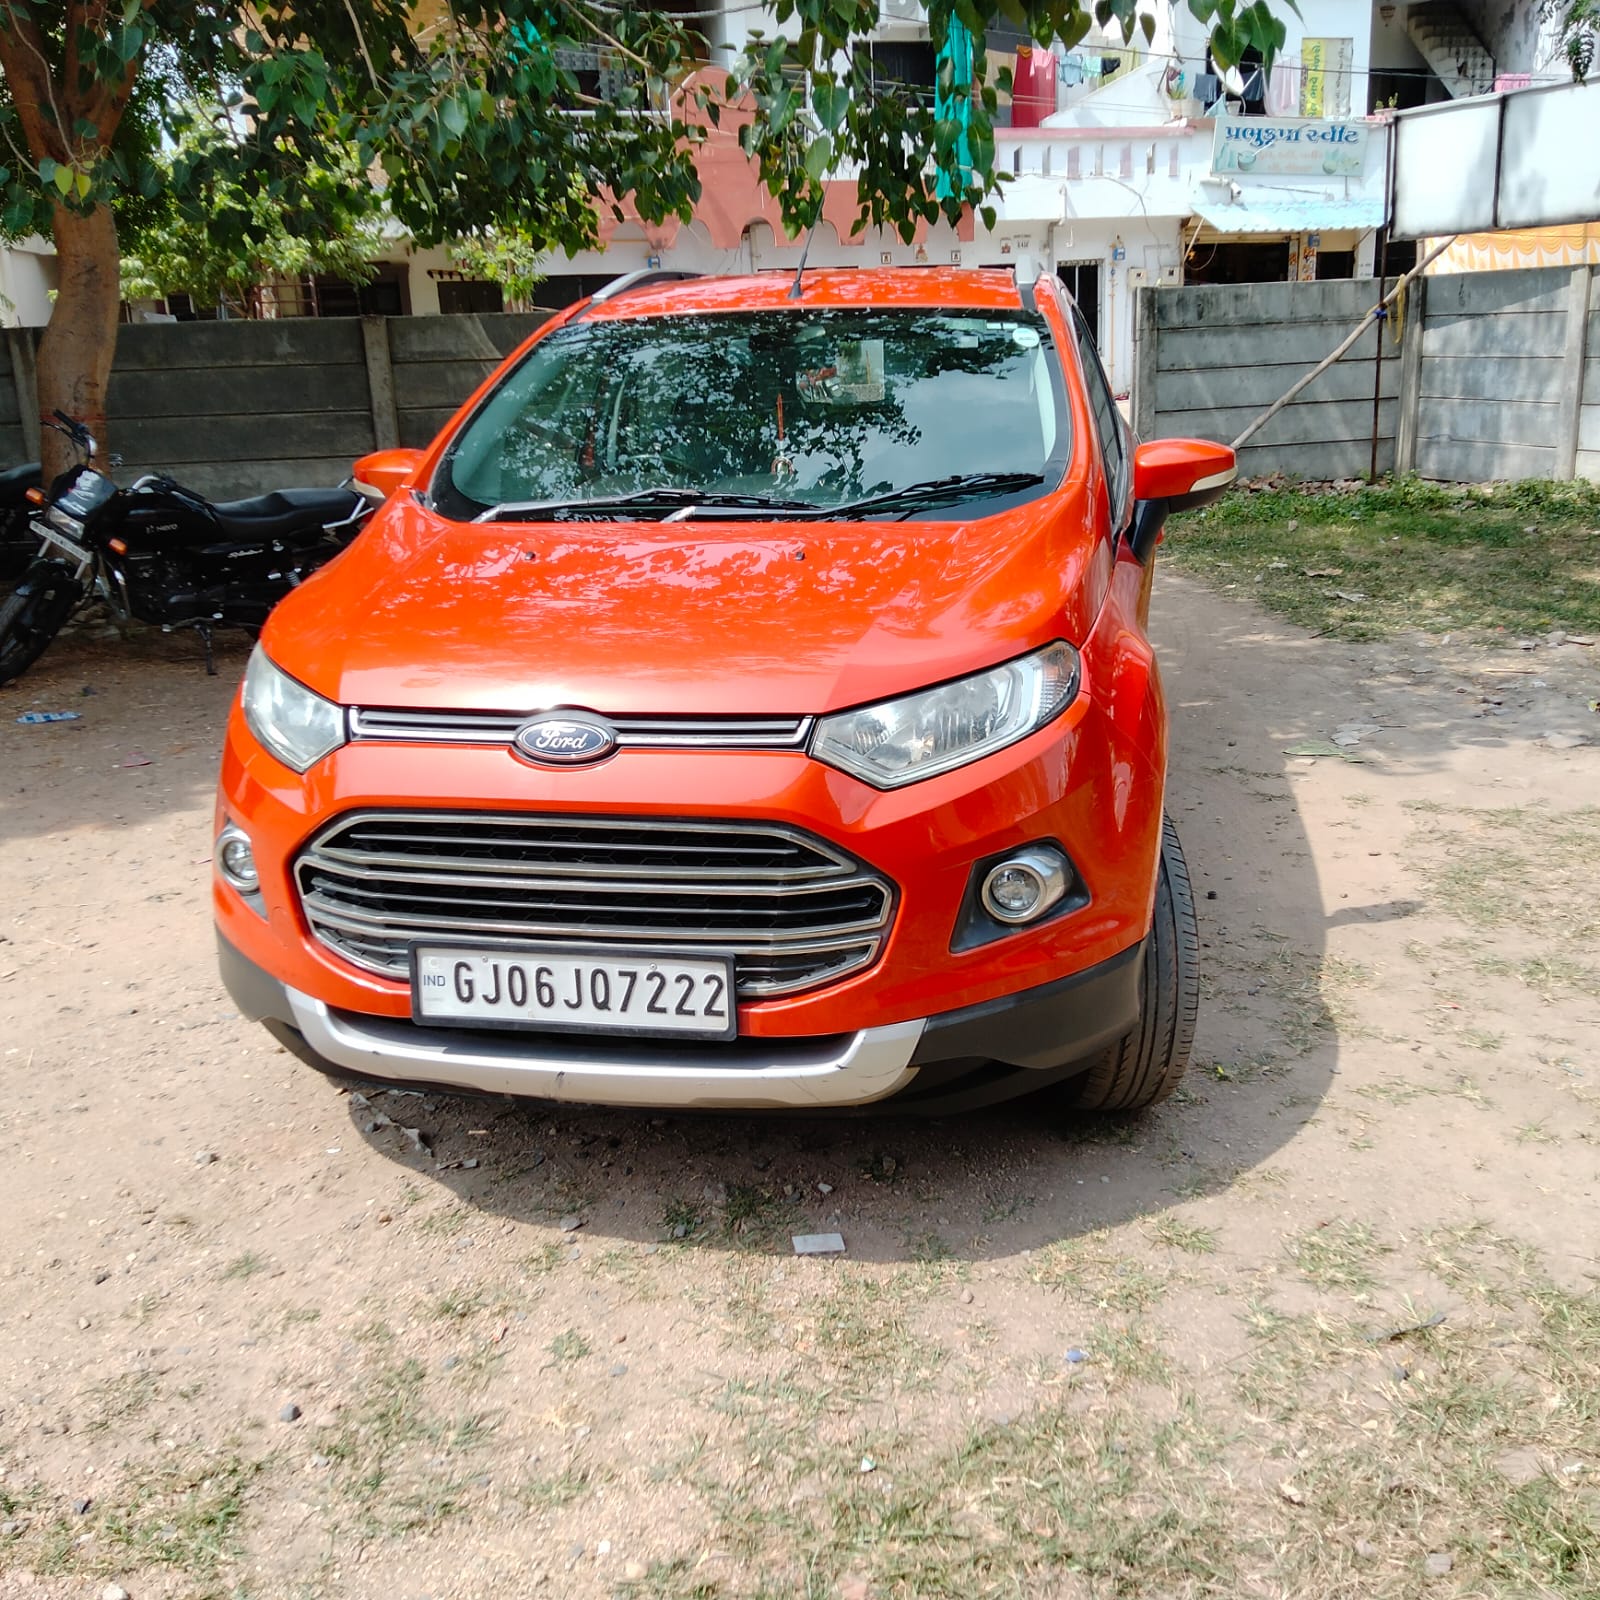 Details View - Ford EcoSport photos - reseller,reseller marketplace,advetising your products,reseller bazzar,resellerbazzar.in,india's classified site,Ford EcoSport , used Ford EcoSport , old Ford EcoSport , old Ford EcoSport in Vadodara , Ford EcoSport in Vadodara